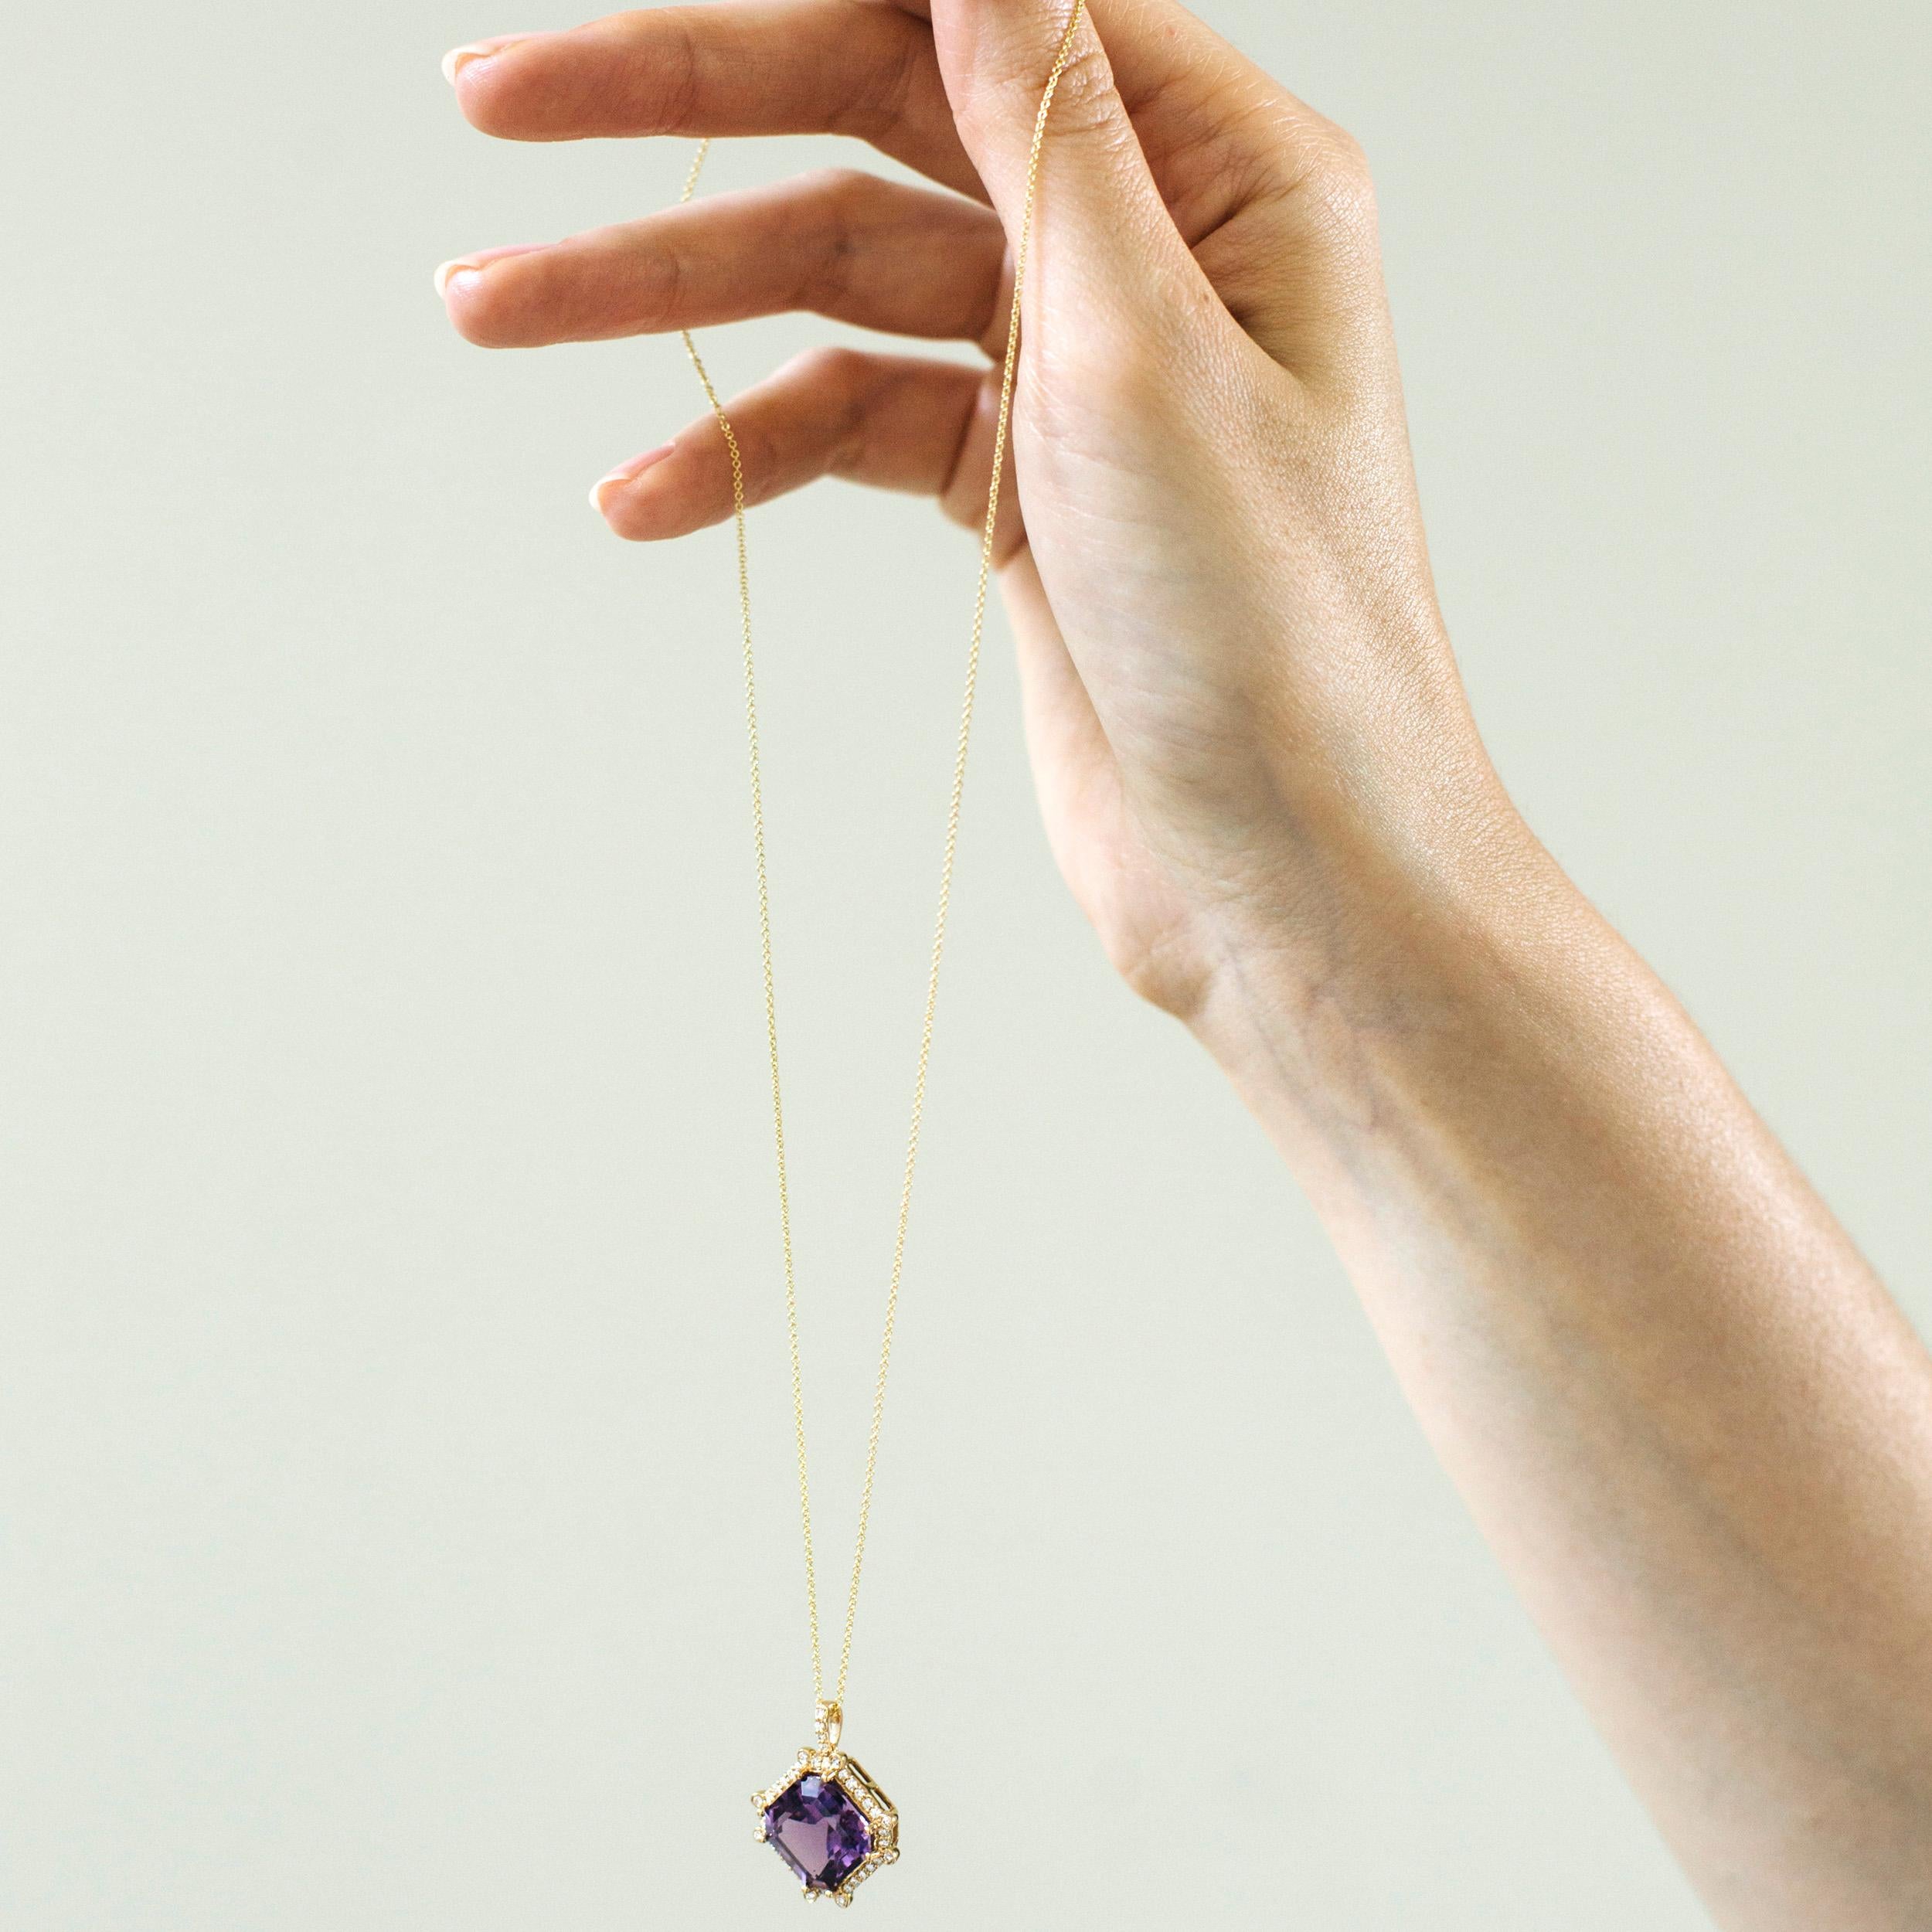 Amethyst & Diamond Octagon Pendant in 18K Yellow Gold from 'Gossip' Collection

Chain Lenght 18